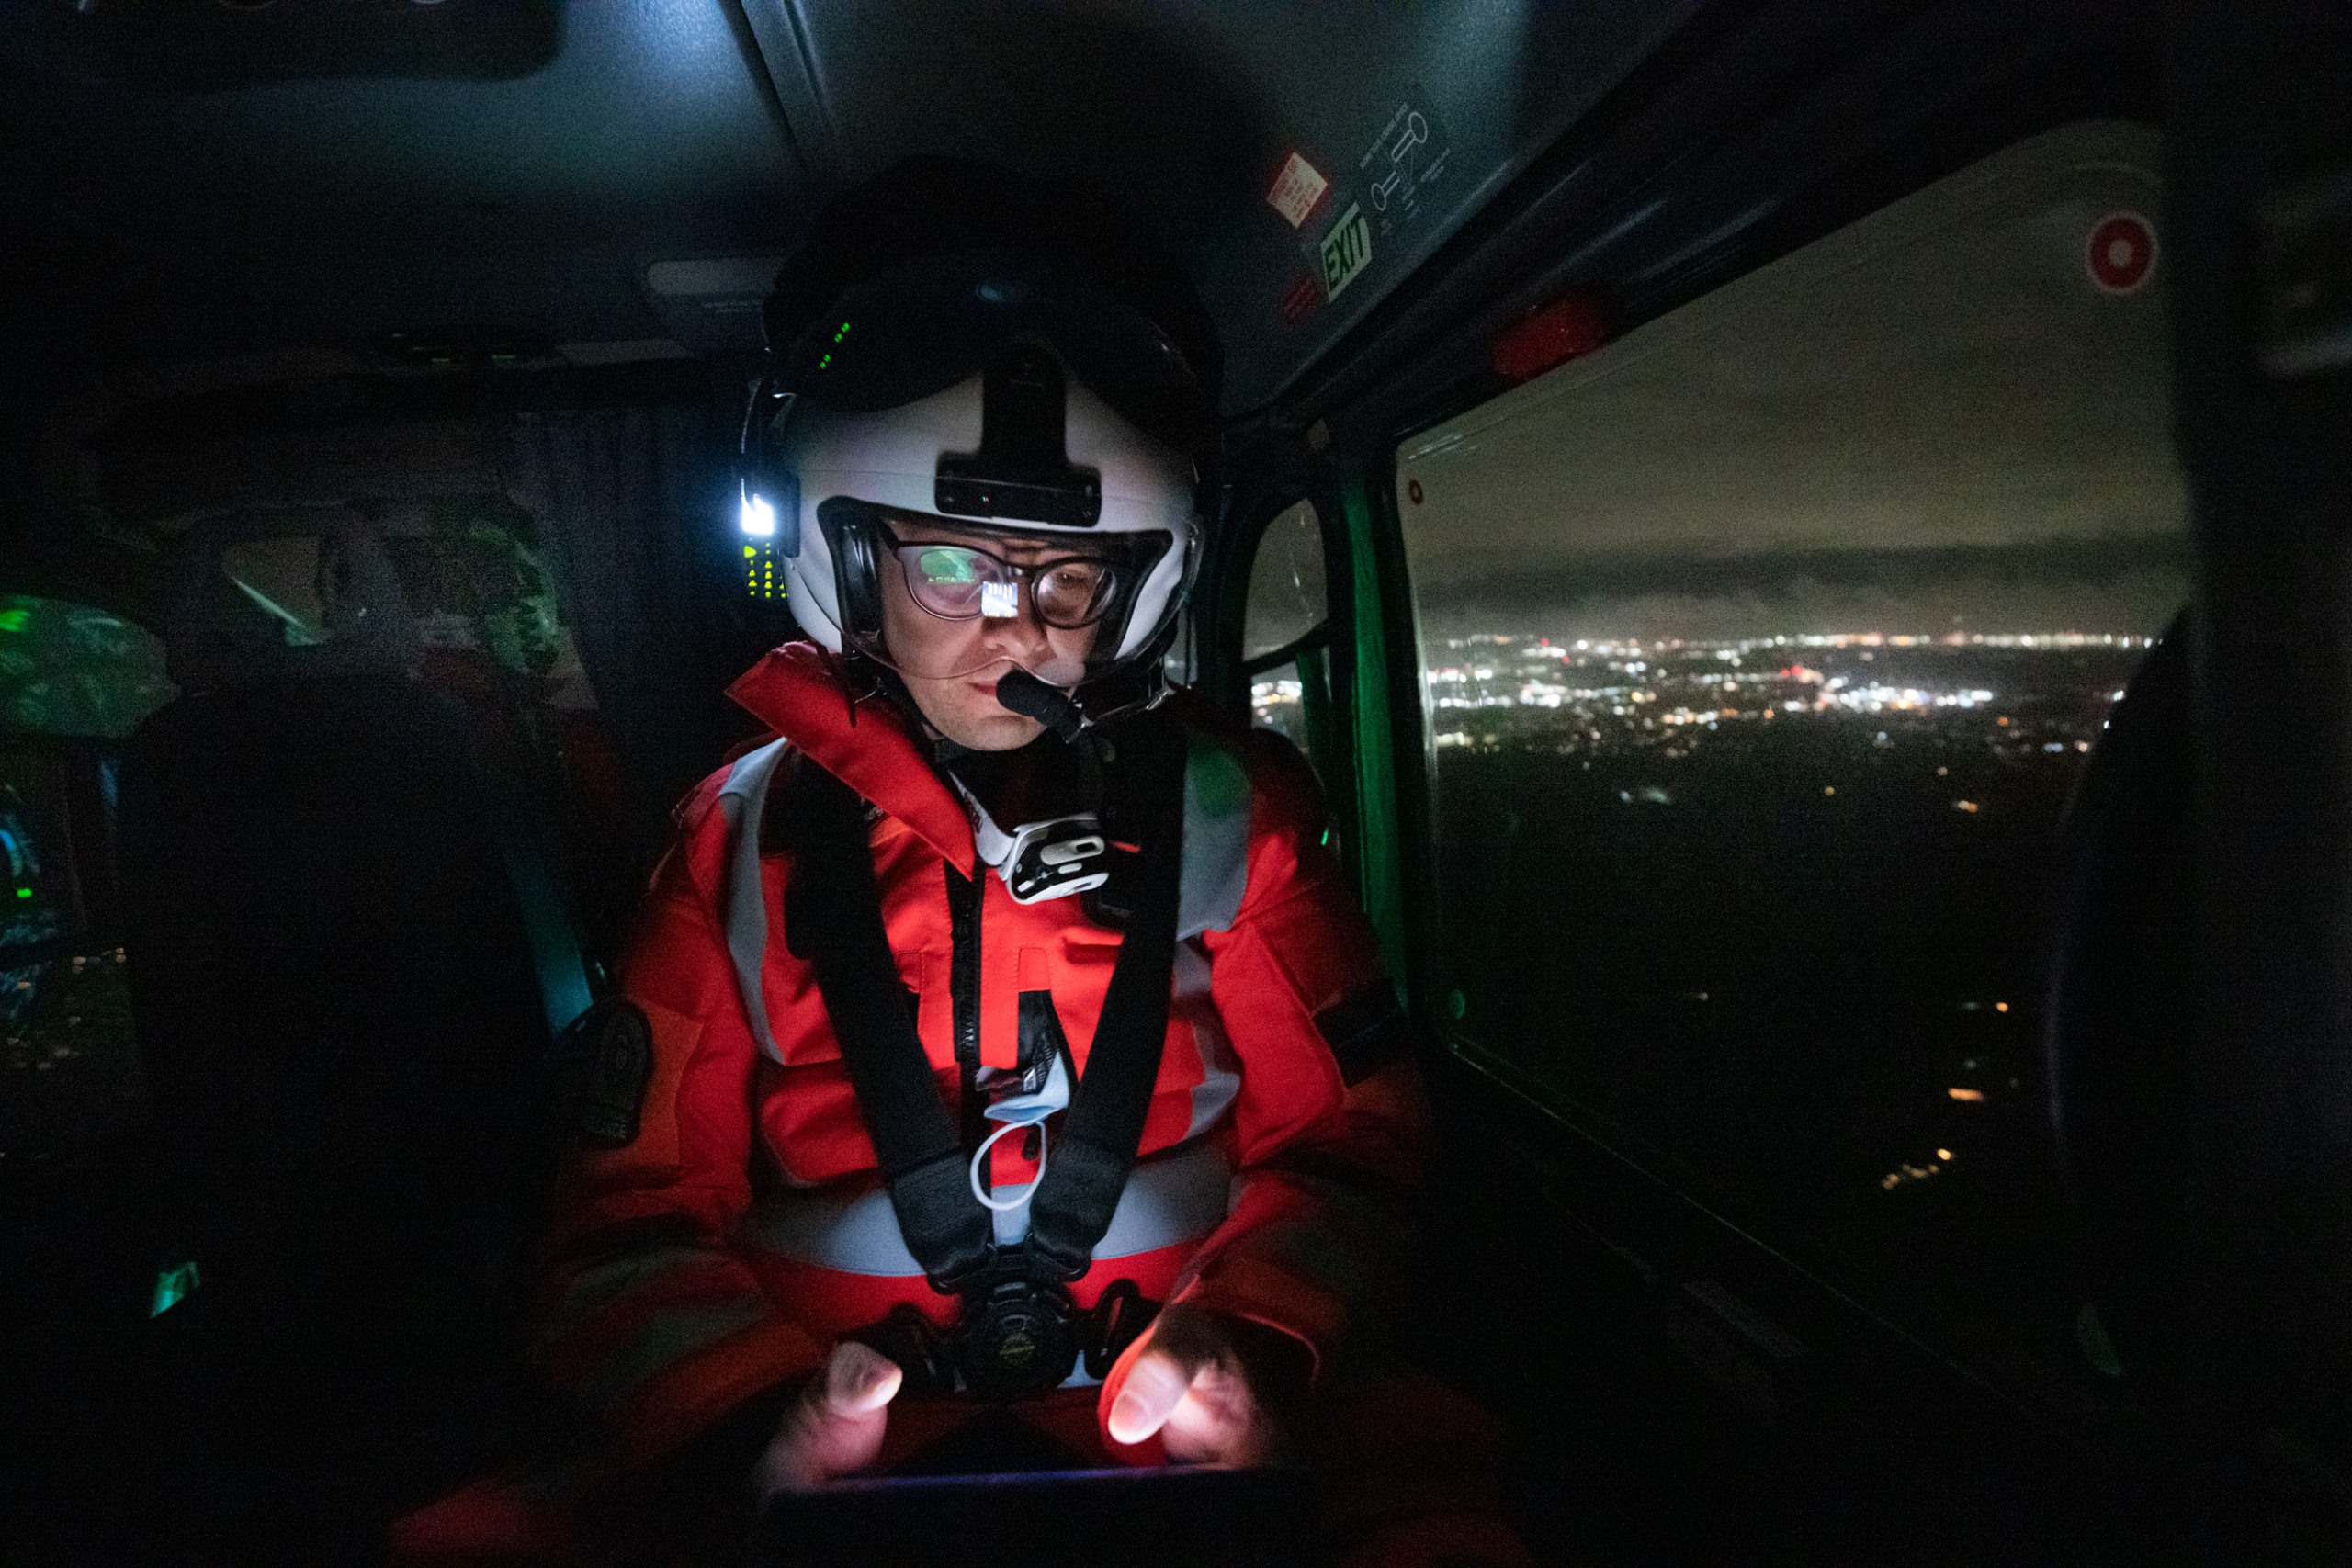 A doctor sat in the back of a helicopter at night with city lights in the background.